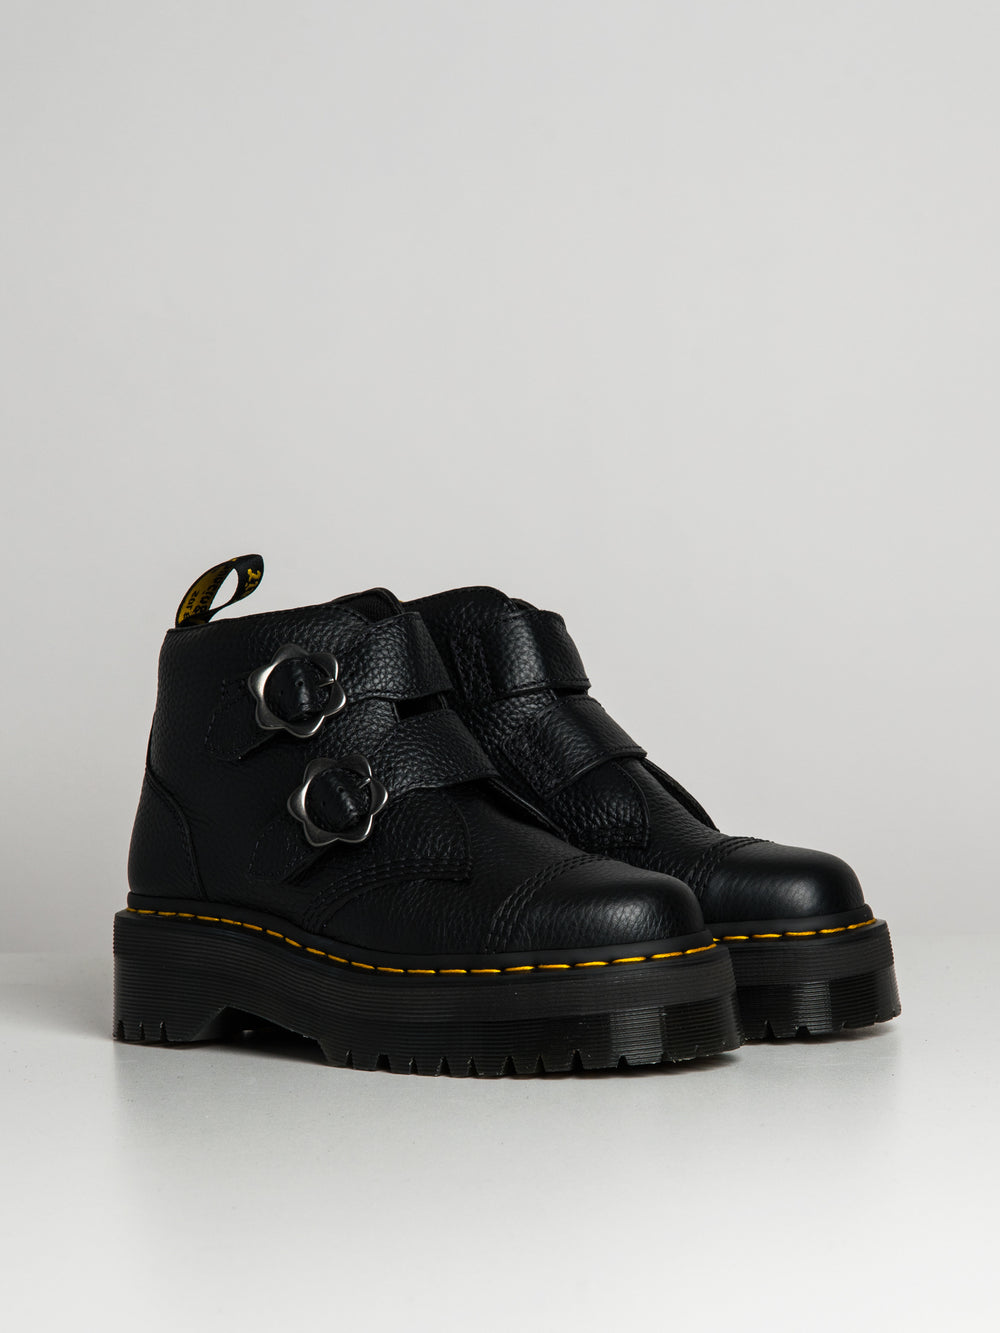 WOMENS DR MARTENS DEVON FLOWER MILLED NAPPA BOOT - CLEARANCE